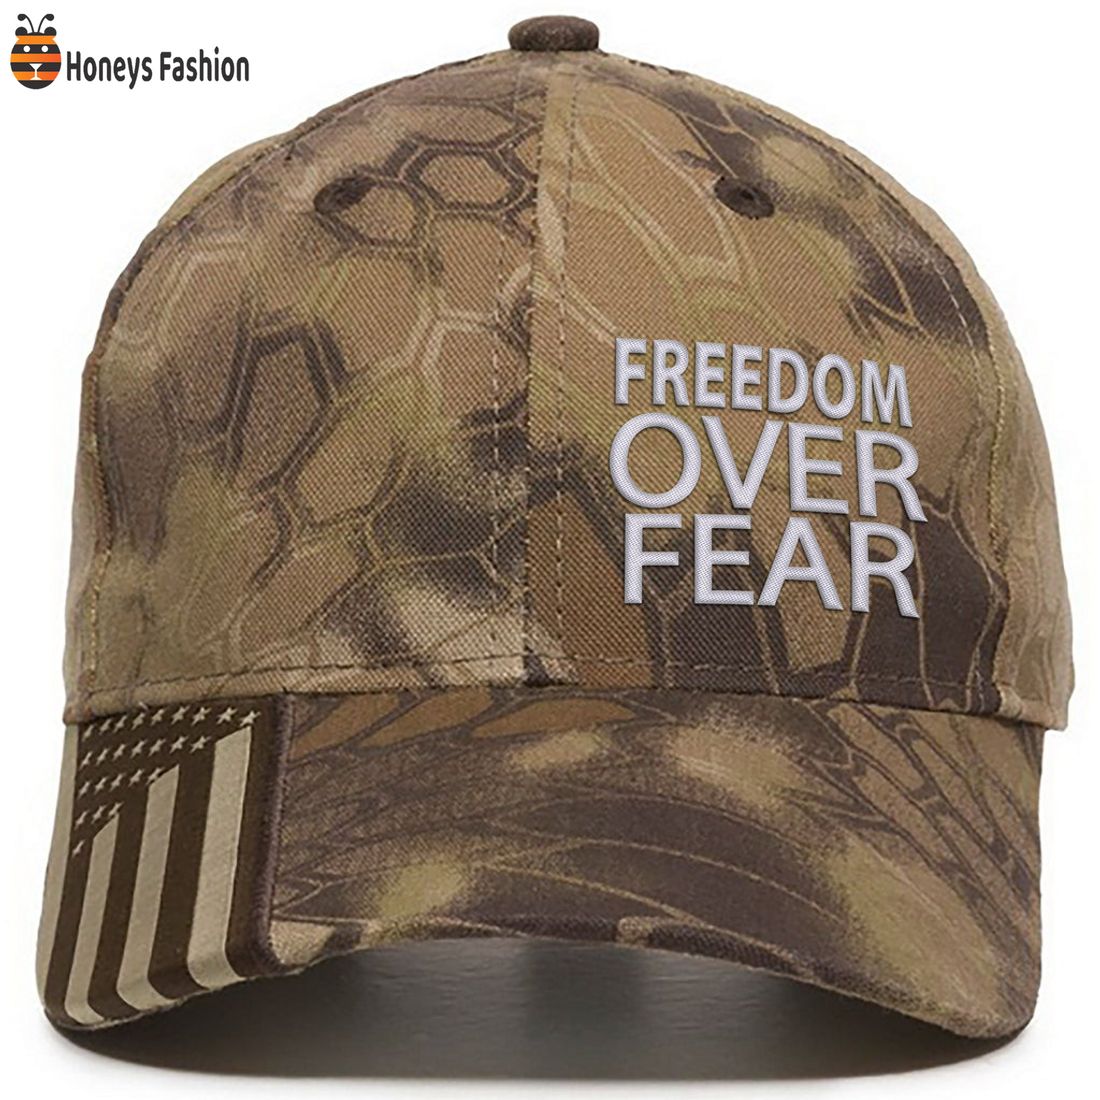 HOT Freedom Over Fear Classic Cap